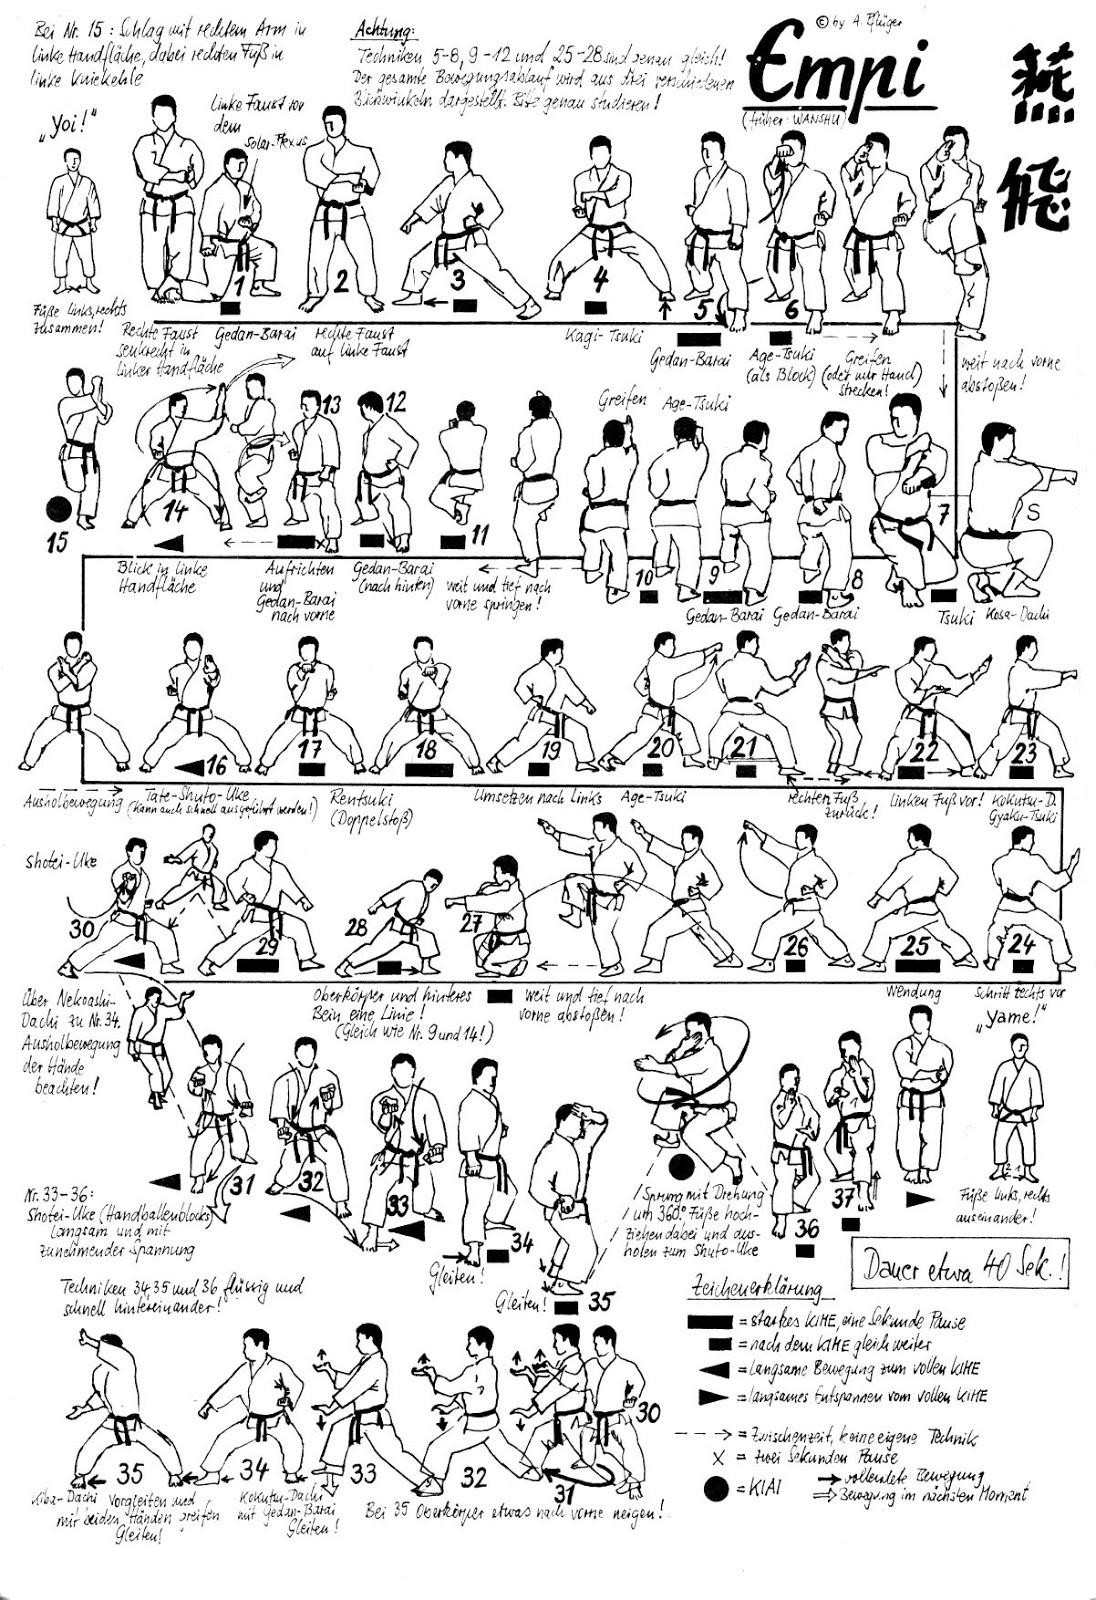 karate world: Kata Names and Movements with Pictures and Video